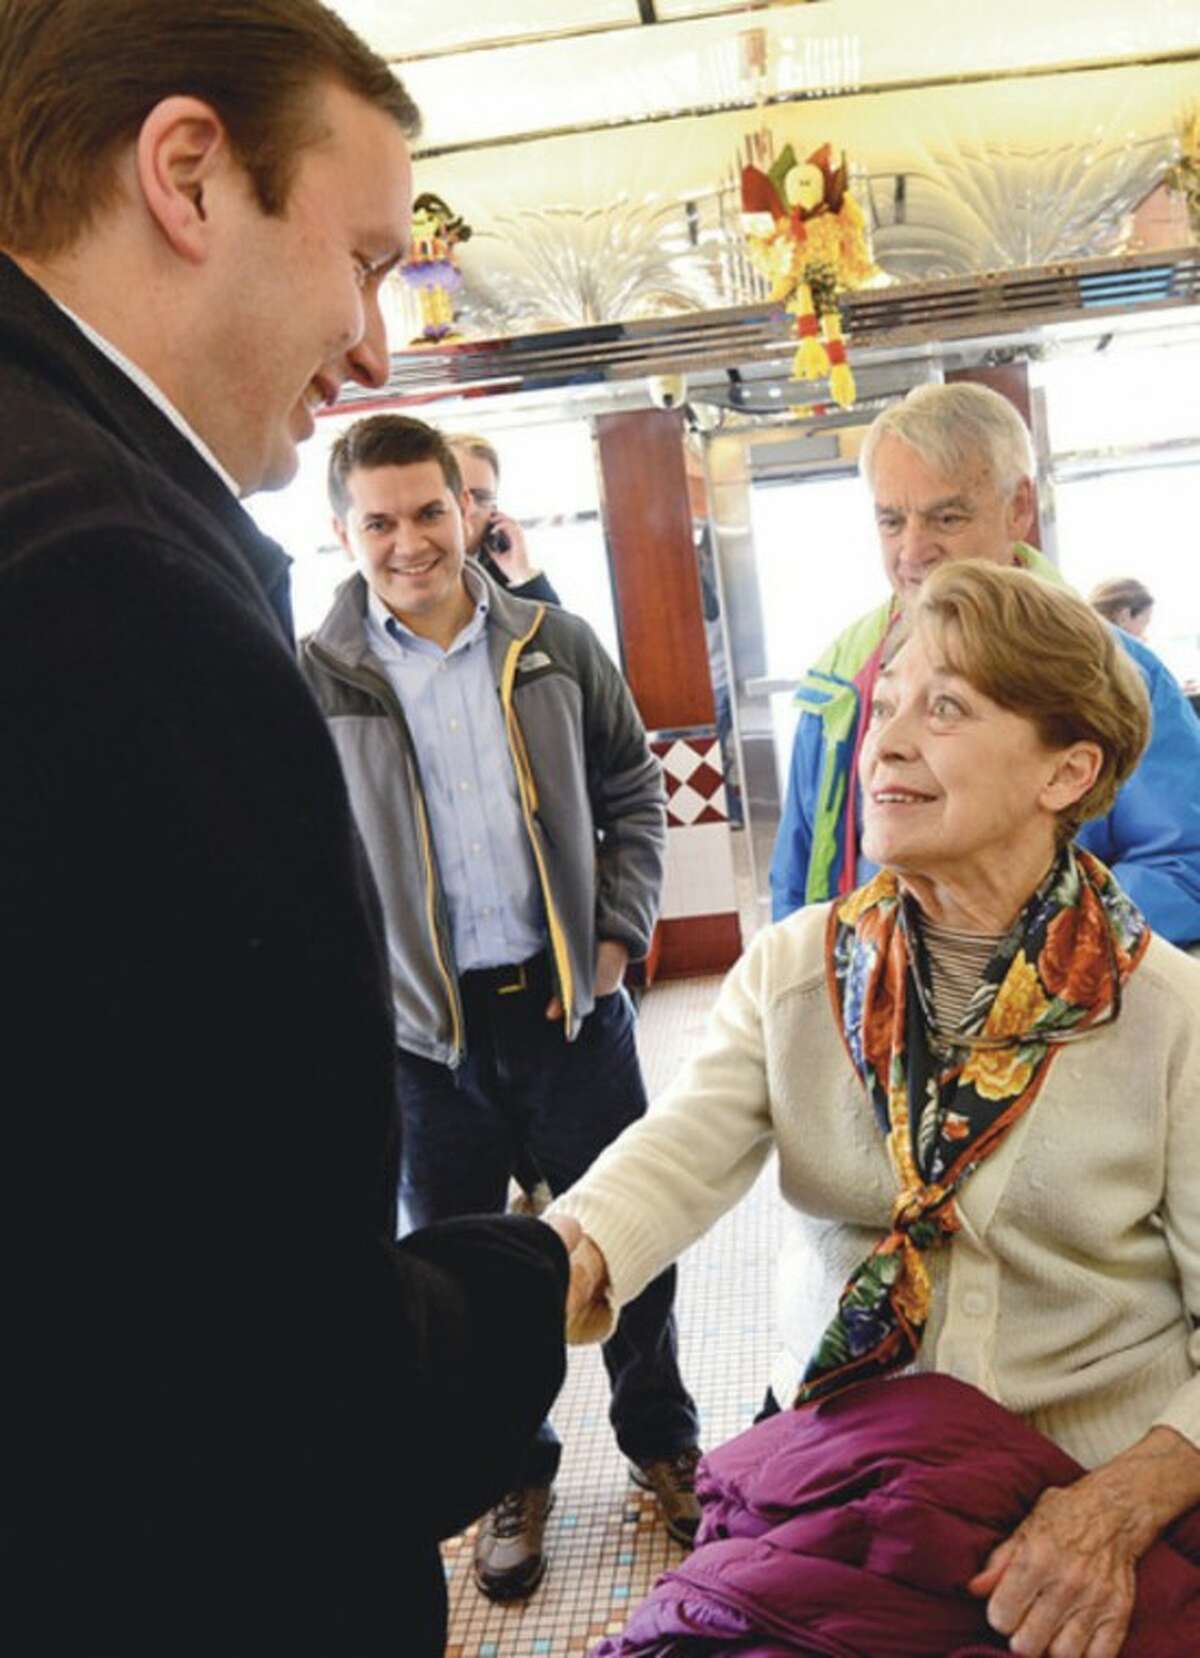 Democratic candidate for State Representative 142nd seat, Kate Tepper, greets newly elected US Senator Chris Murphy at The Post Rd Diner Thursday. Hour photo / Erik Trautmann